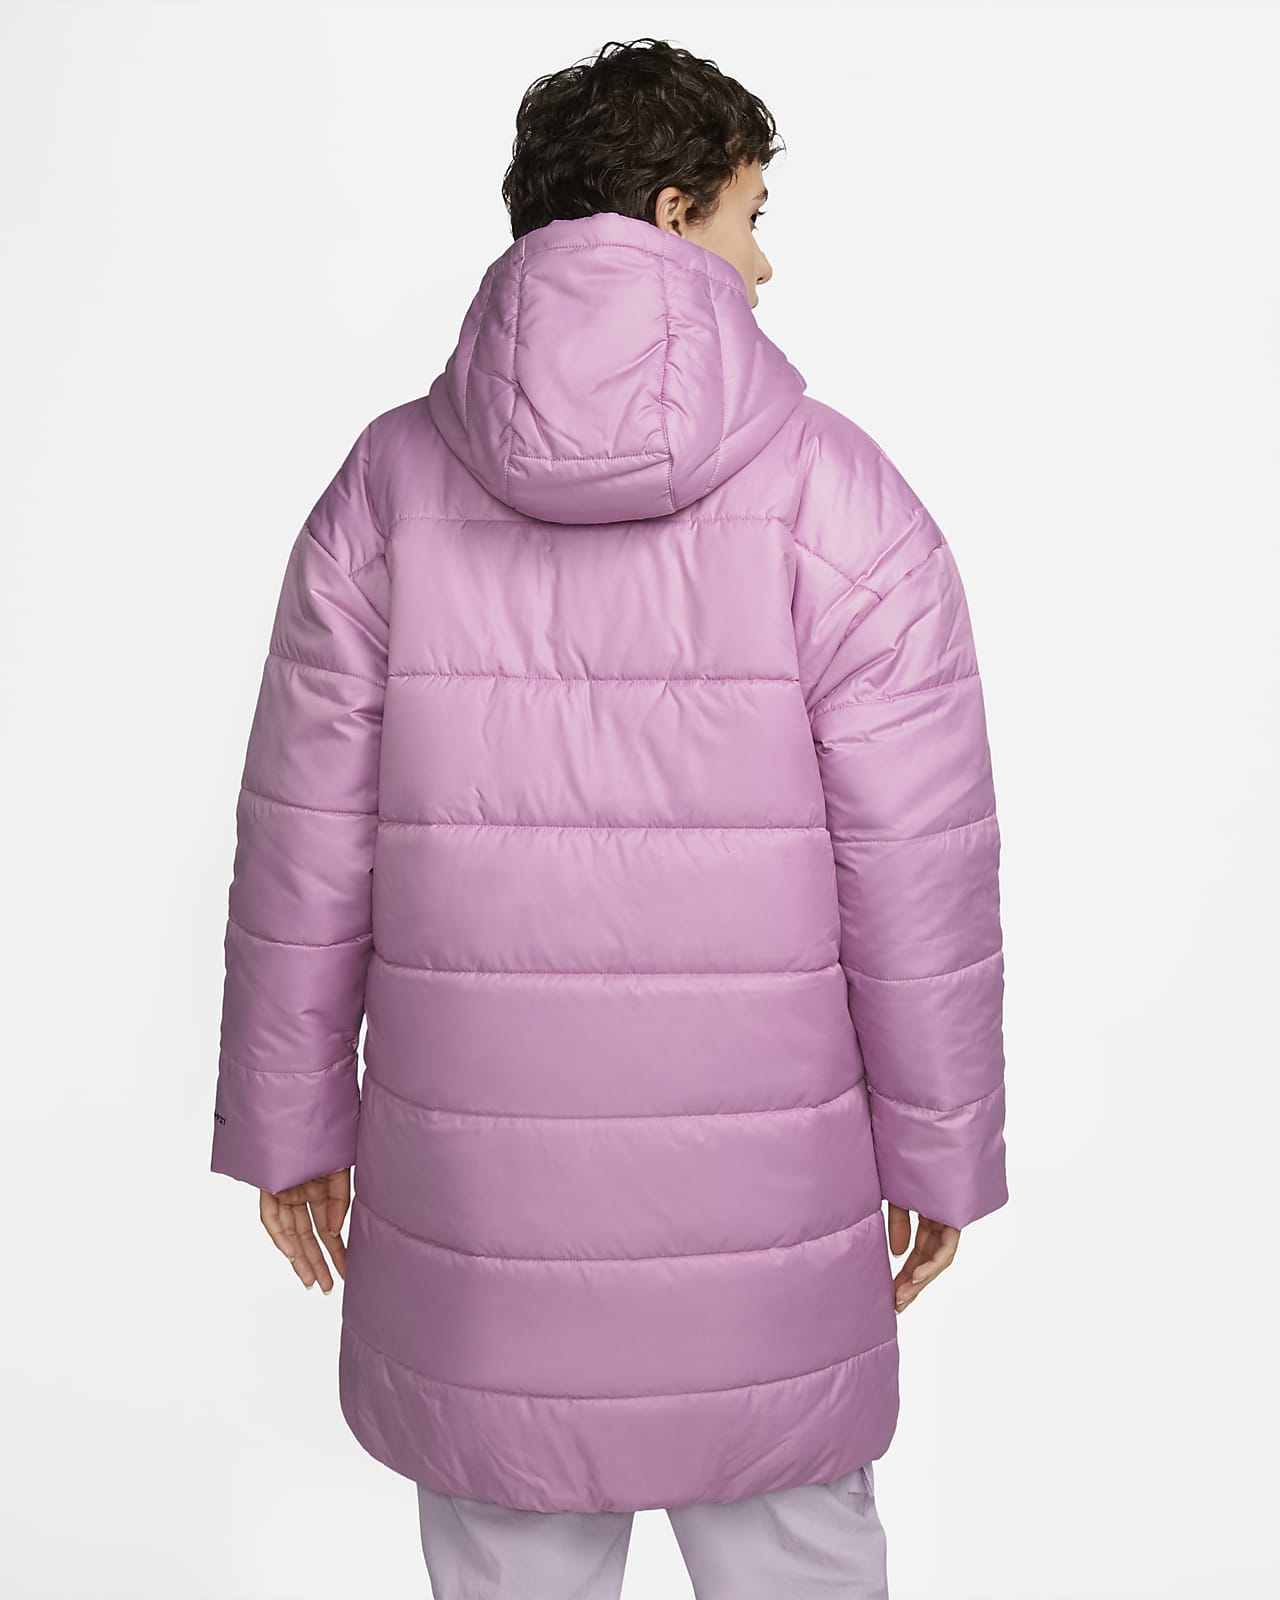 Sportswear Therma-FIT Repel Women's Synthetic-Fill Hooded Parka. Nike.com